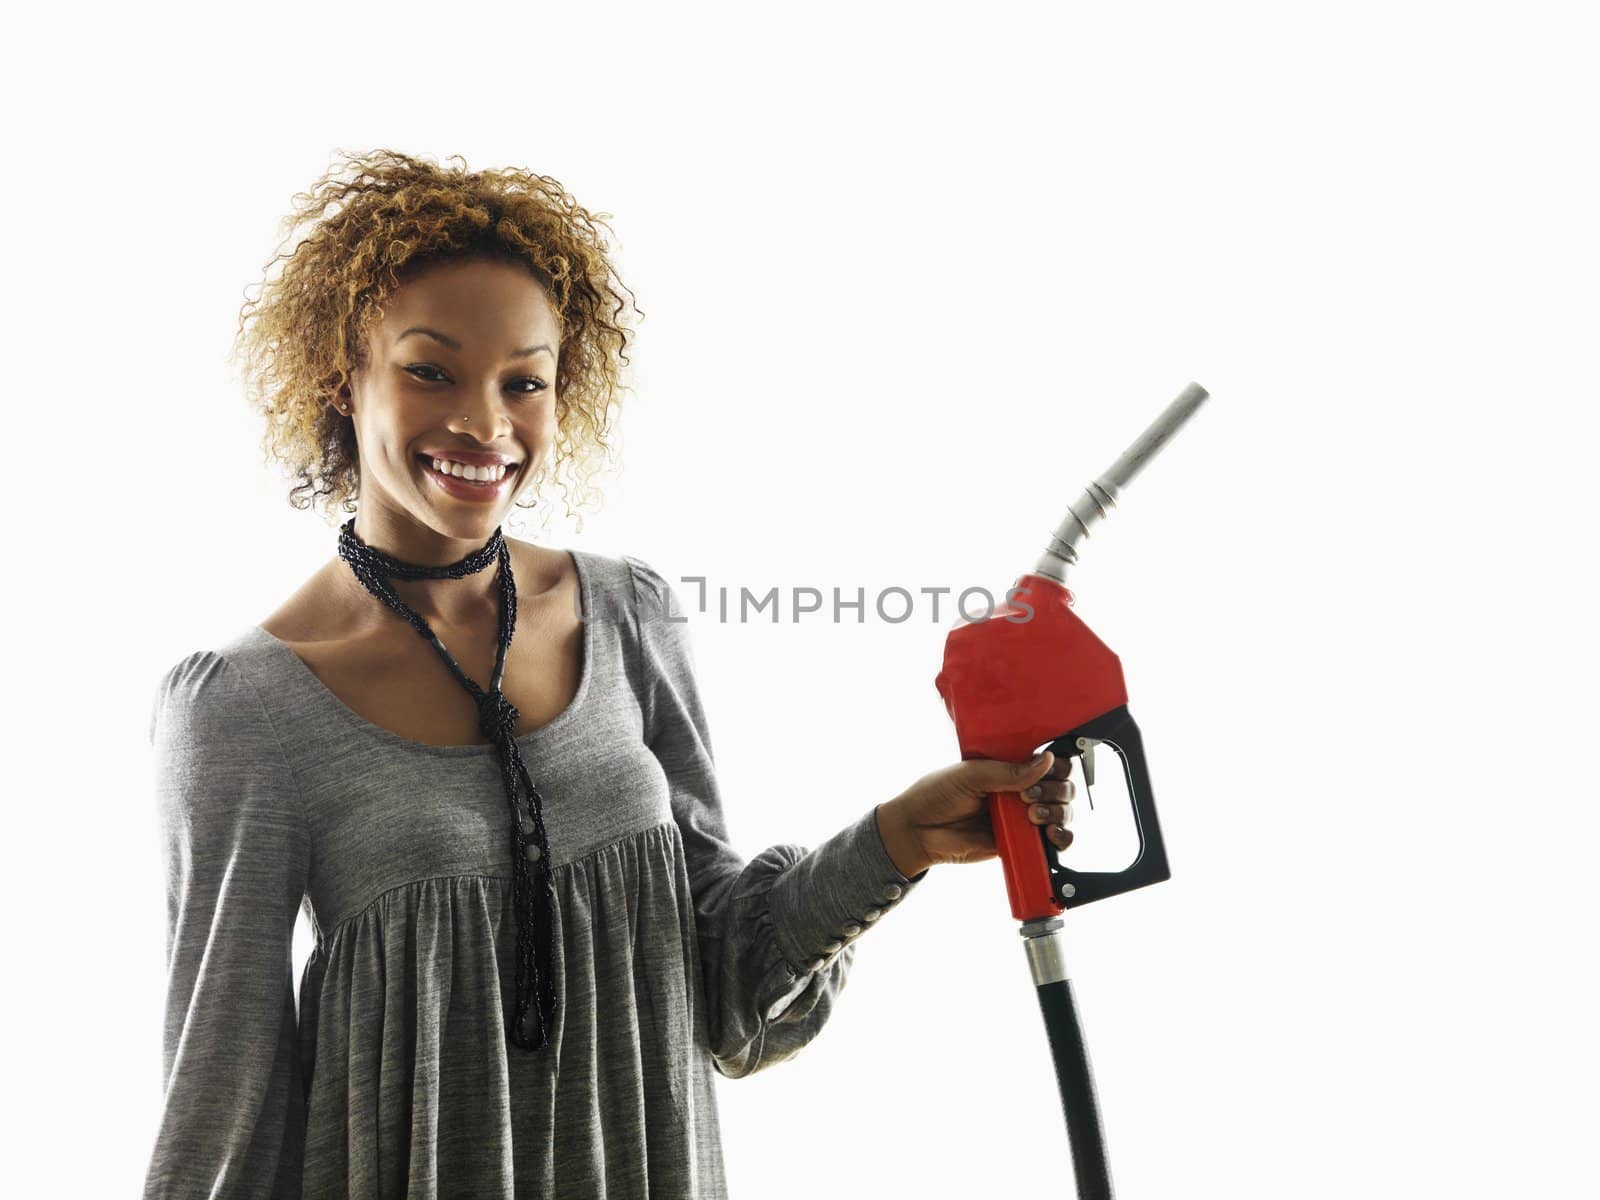 Portrait of pretty young woman smiling holding gas pump nozzle on white background.